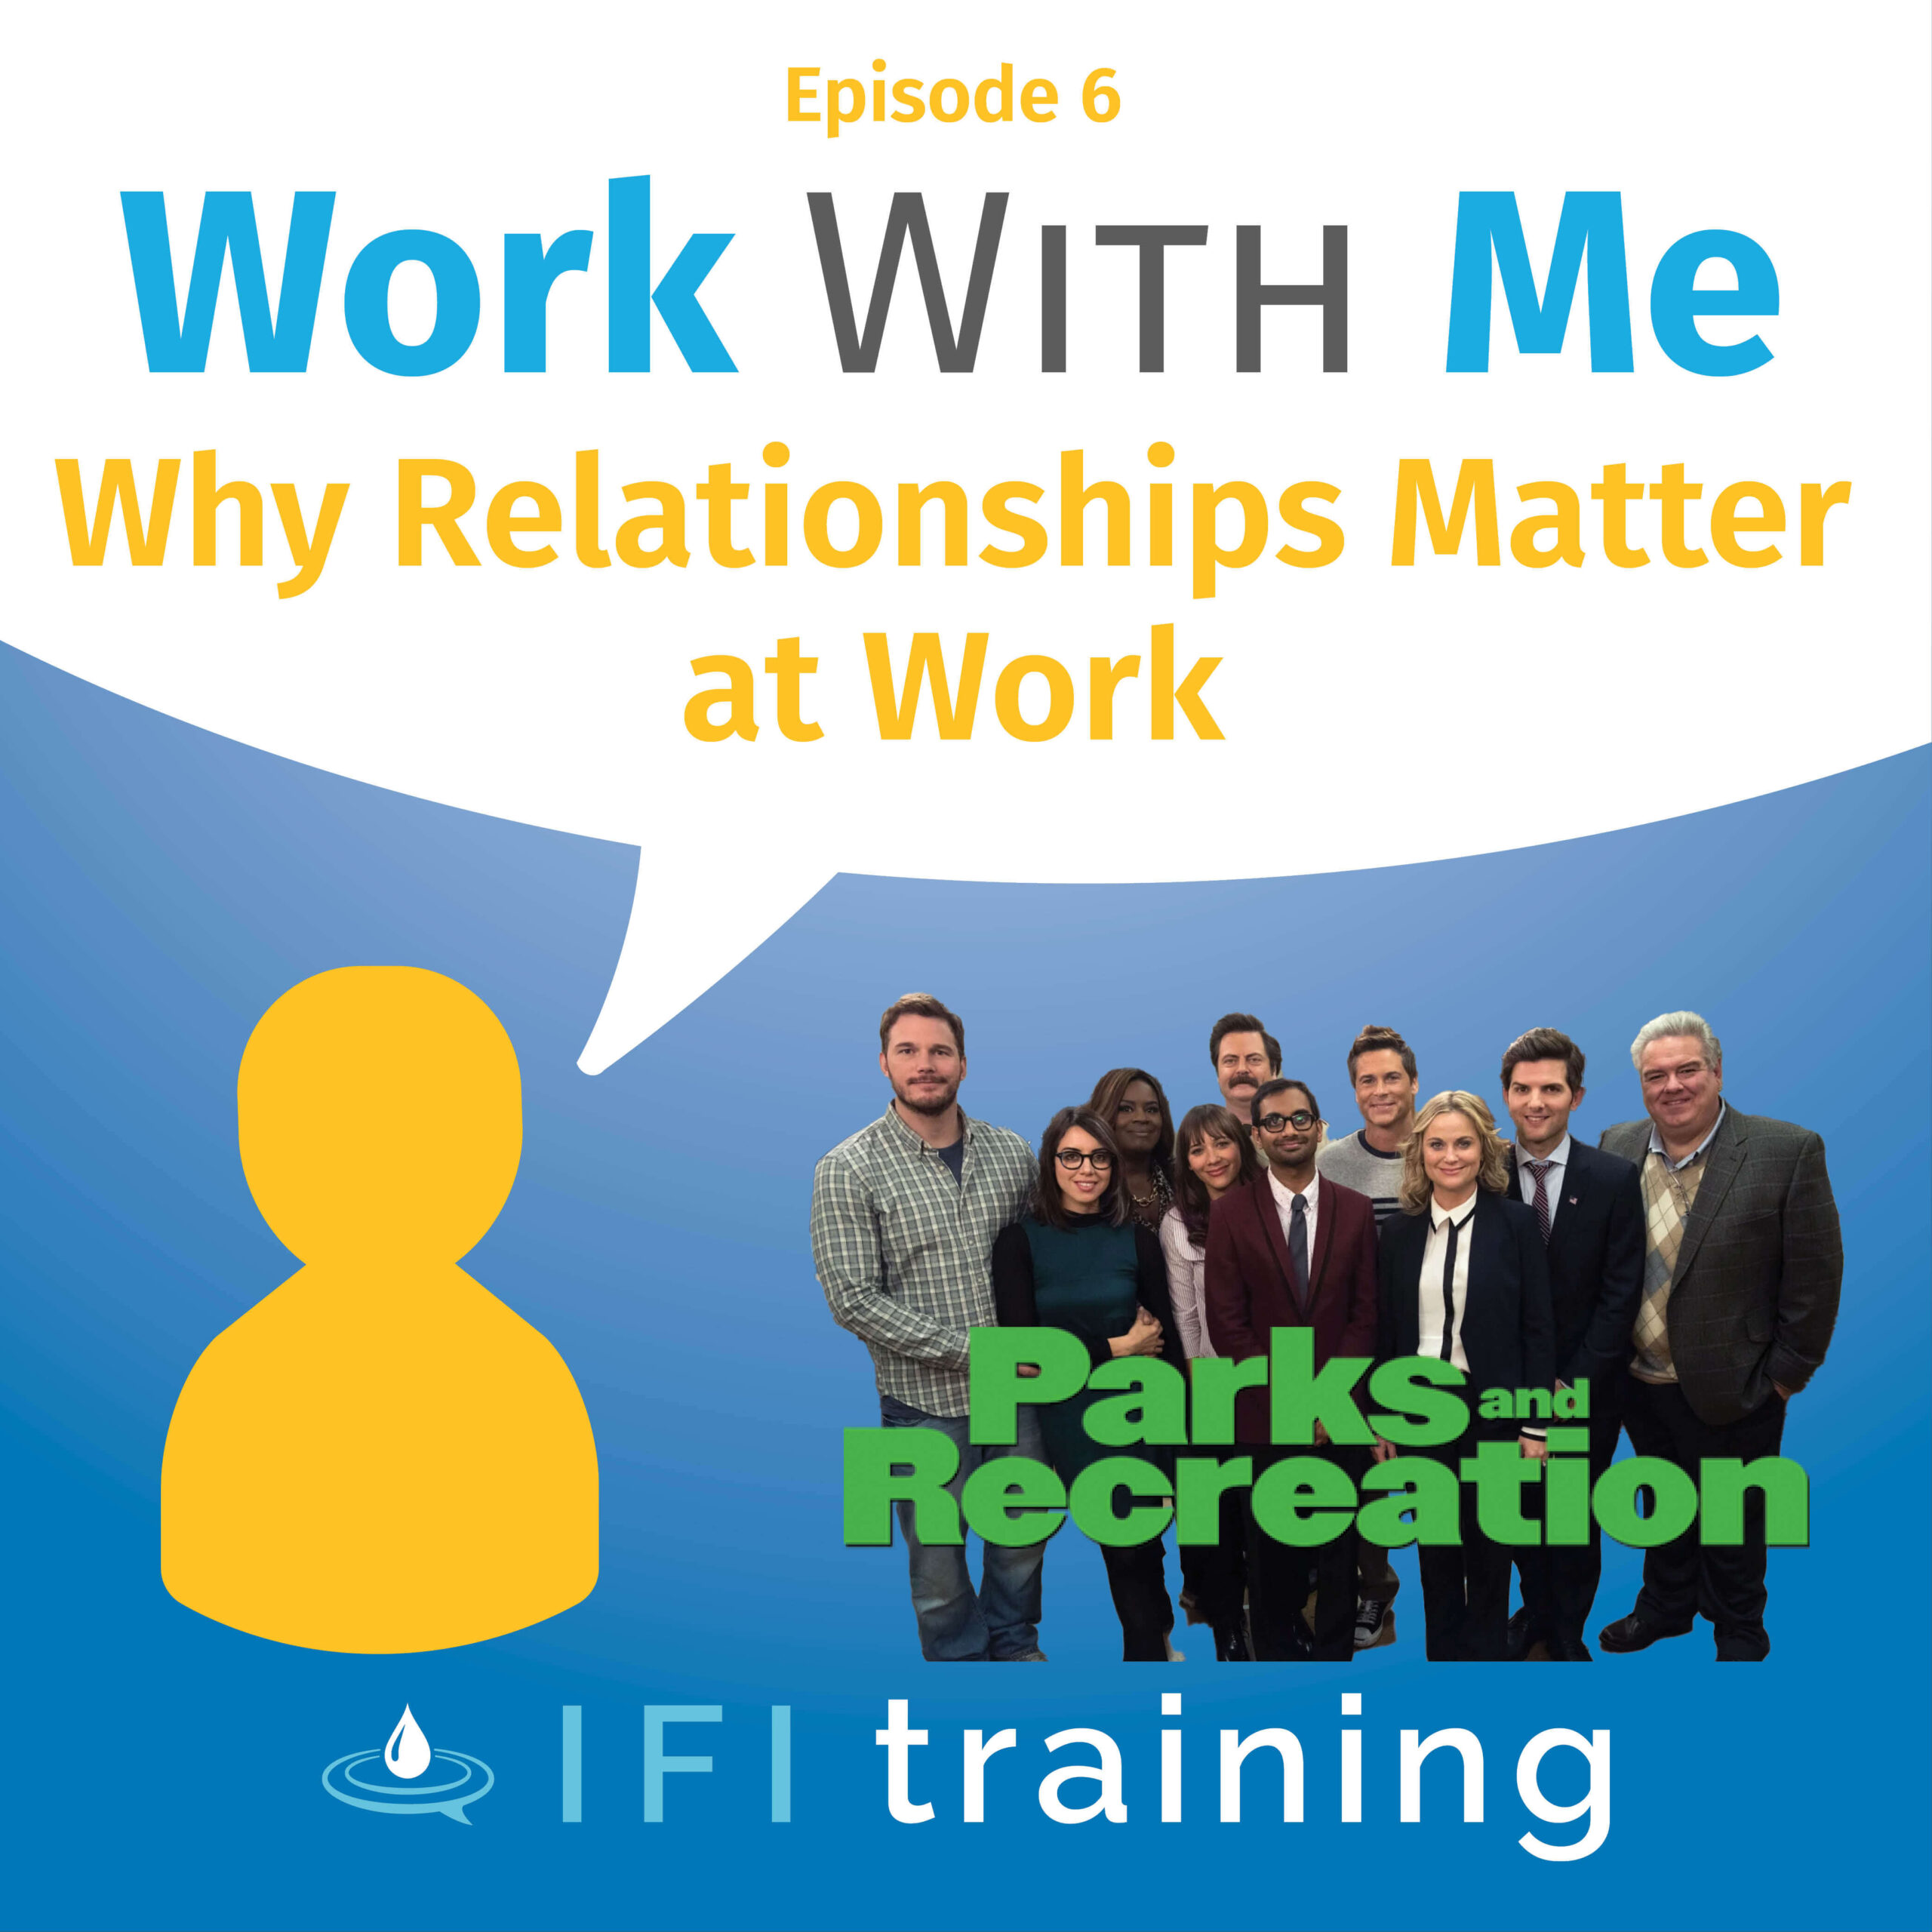 Podcast cover for Episode 6 of the Work With me Podcast - Why Relationships Matter at Work